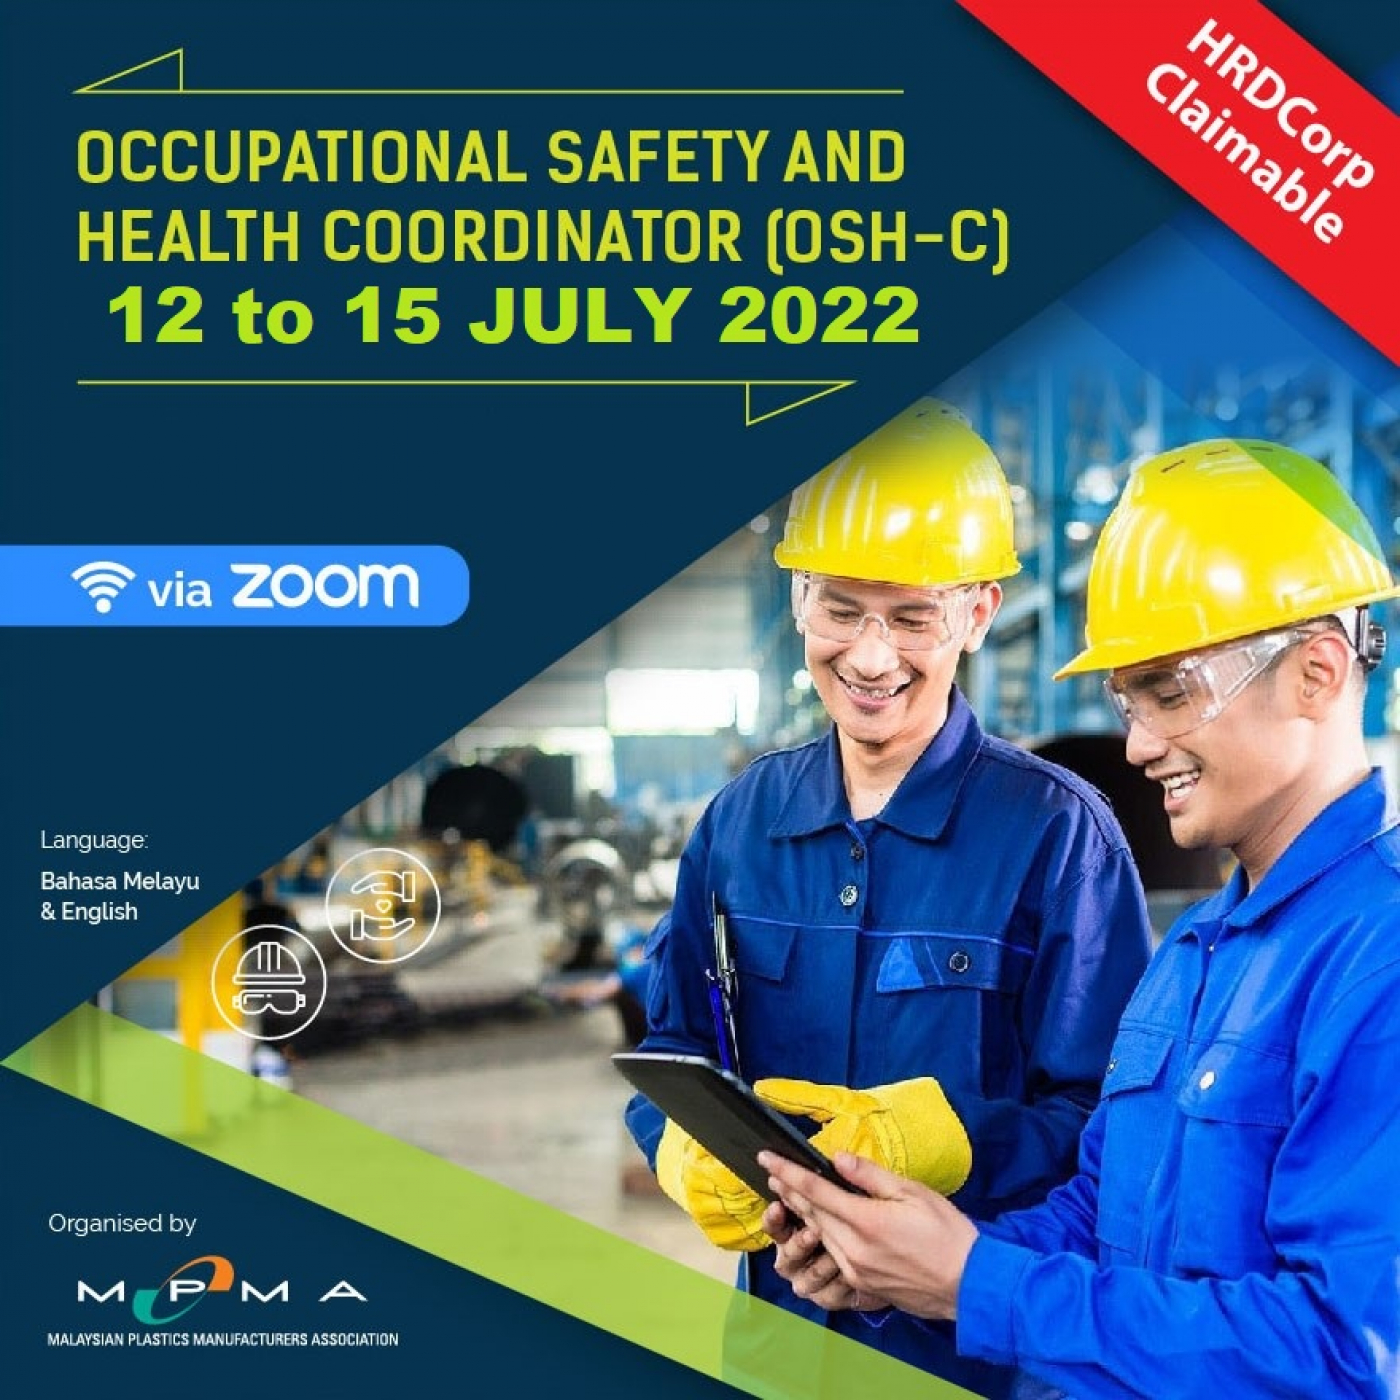 OCCUPATIONAL SAFETY & HEALTH COORDINATOR CERTIFICATION PROGRAMME